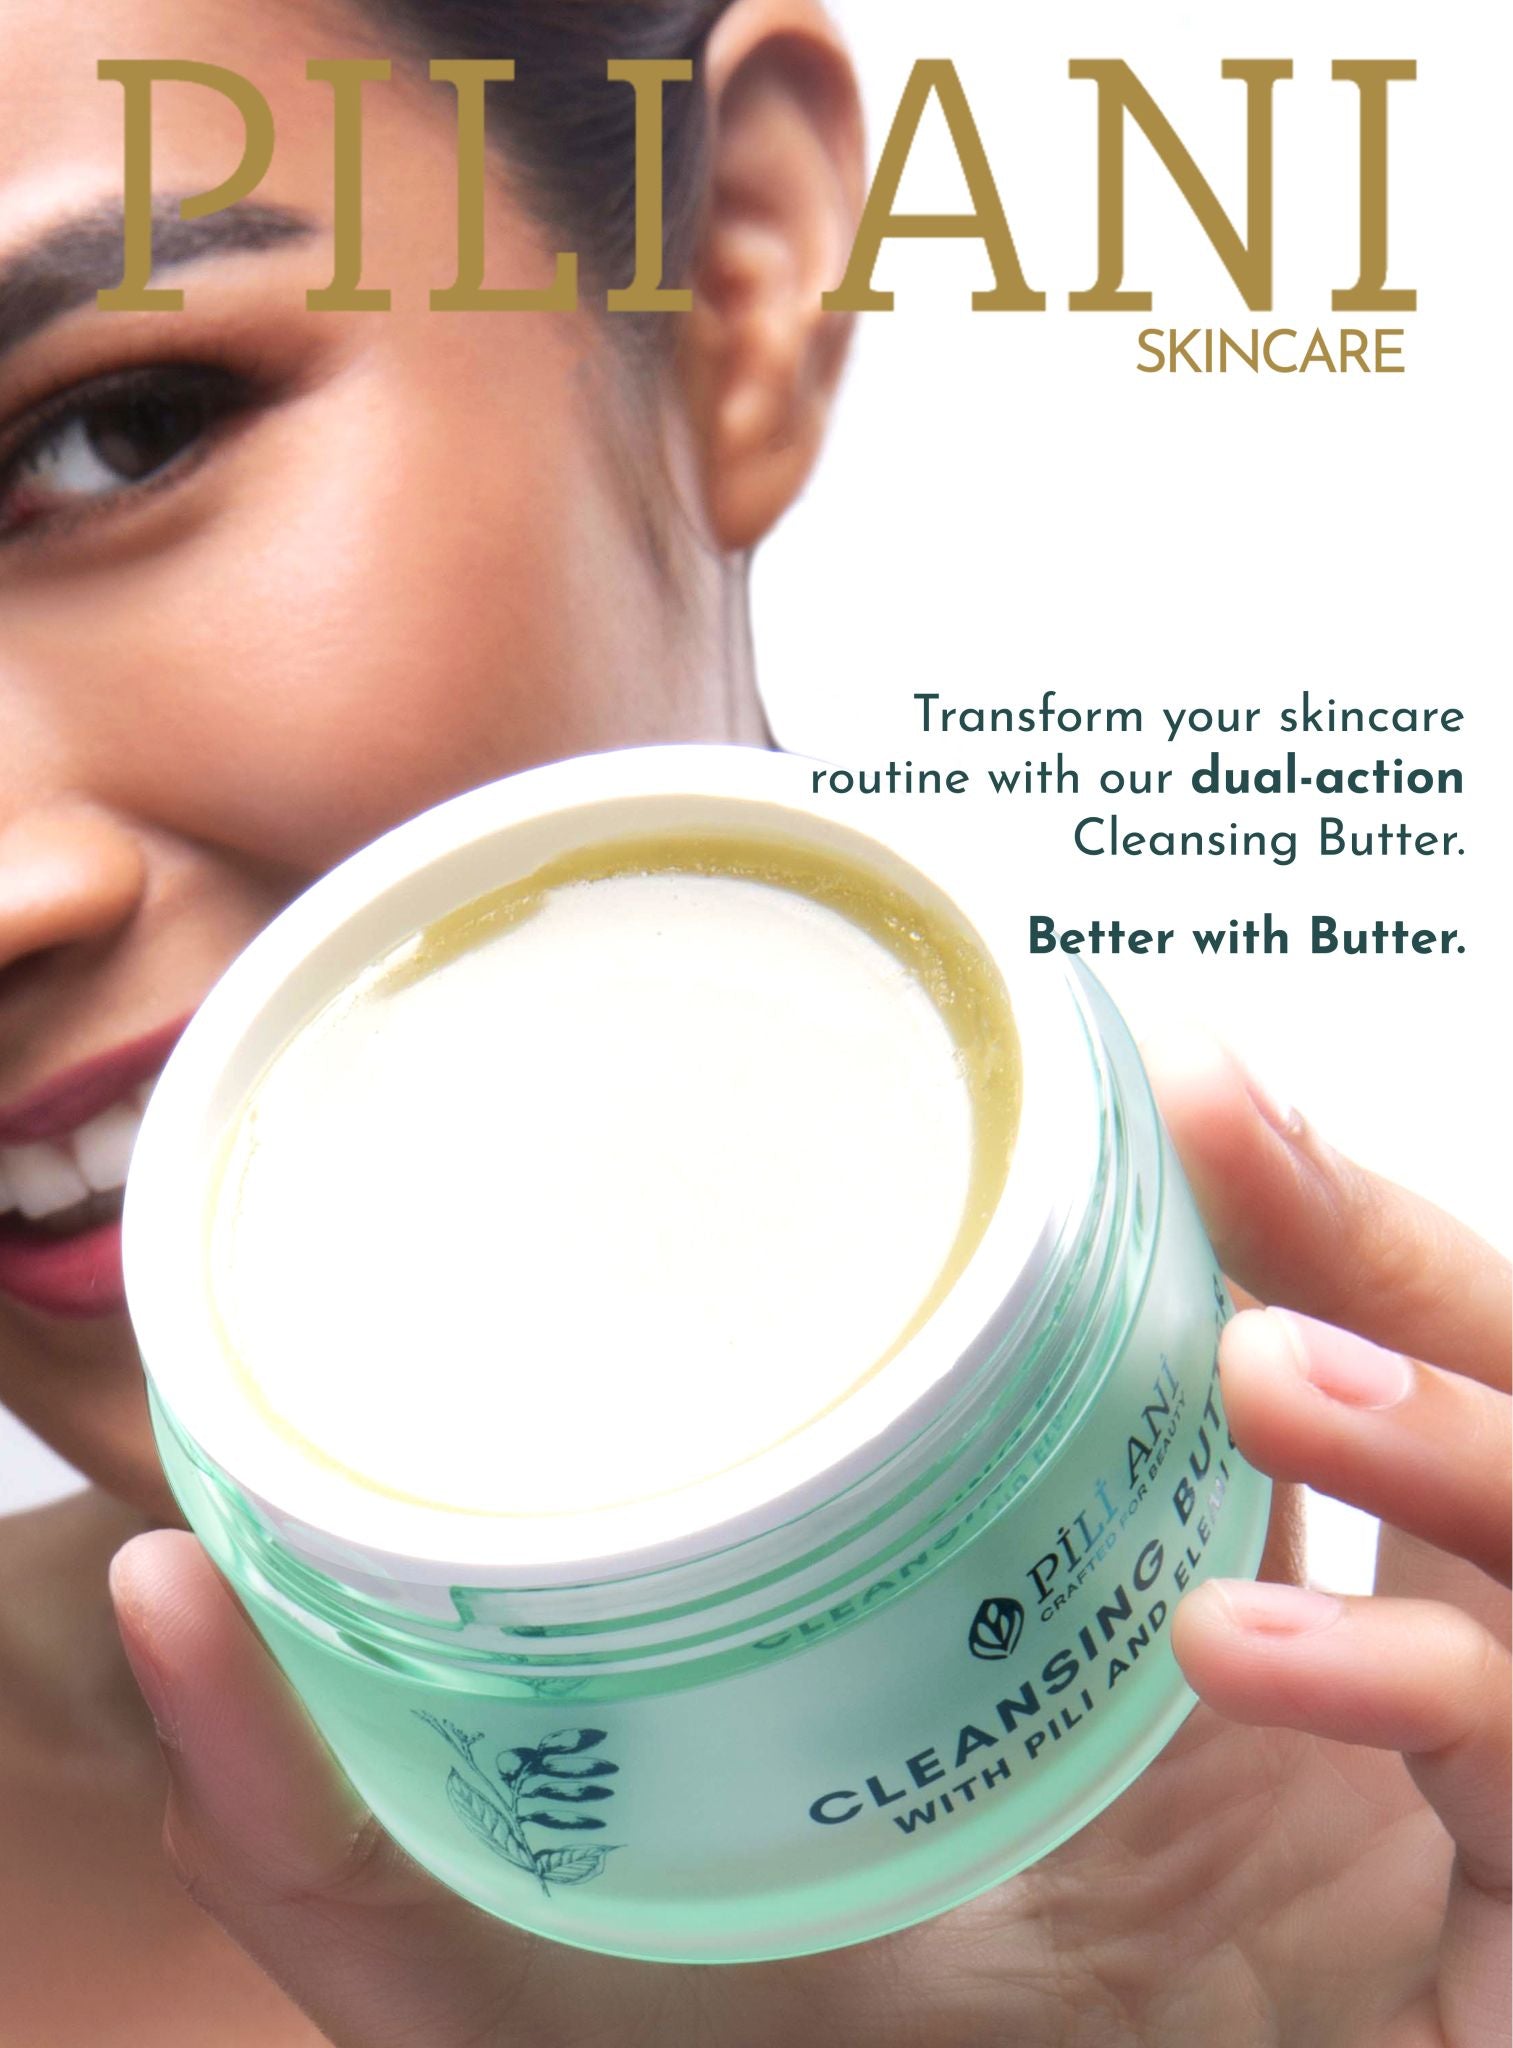 [Early Access] Cleansing Butter + Cleansing Oil